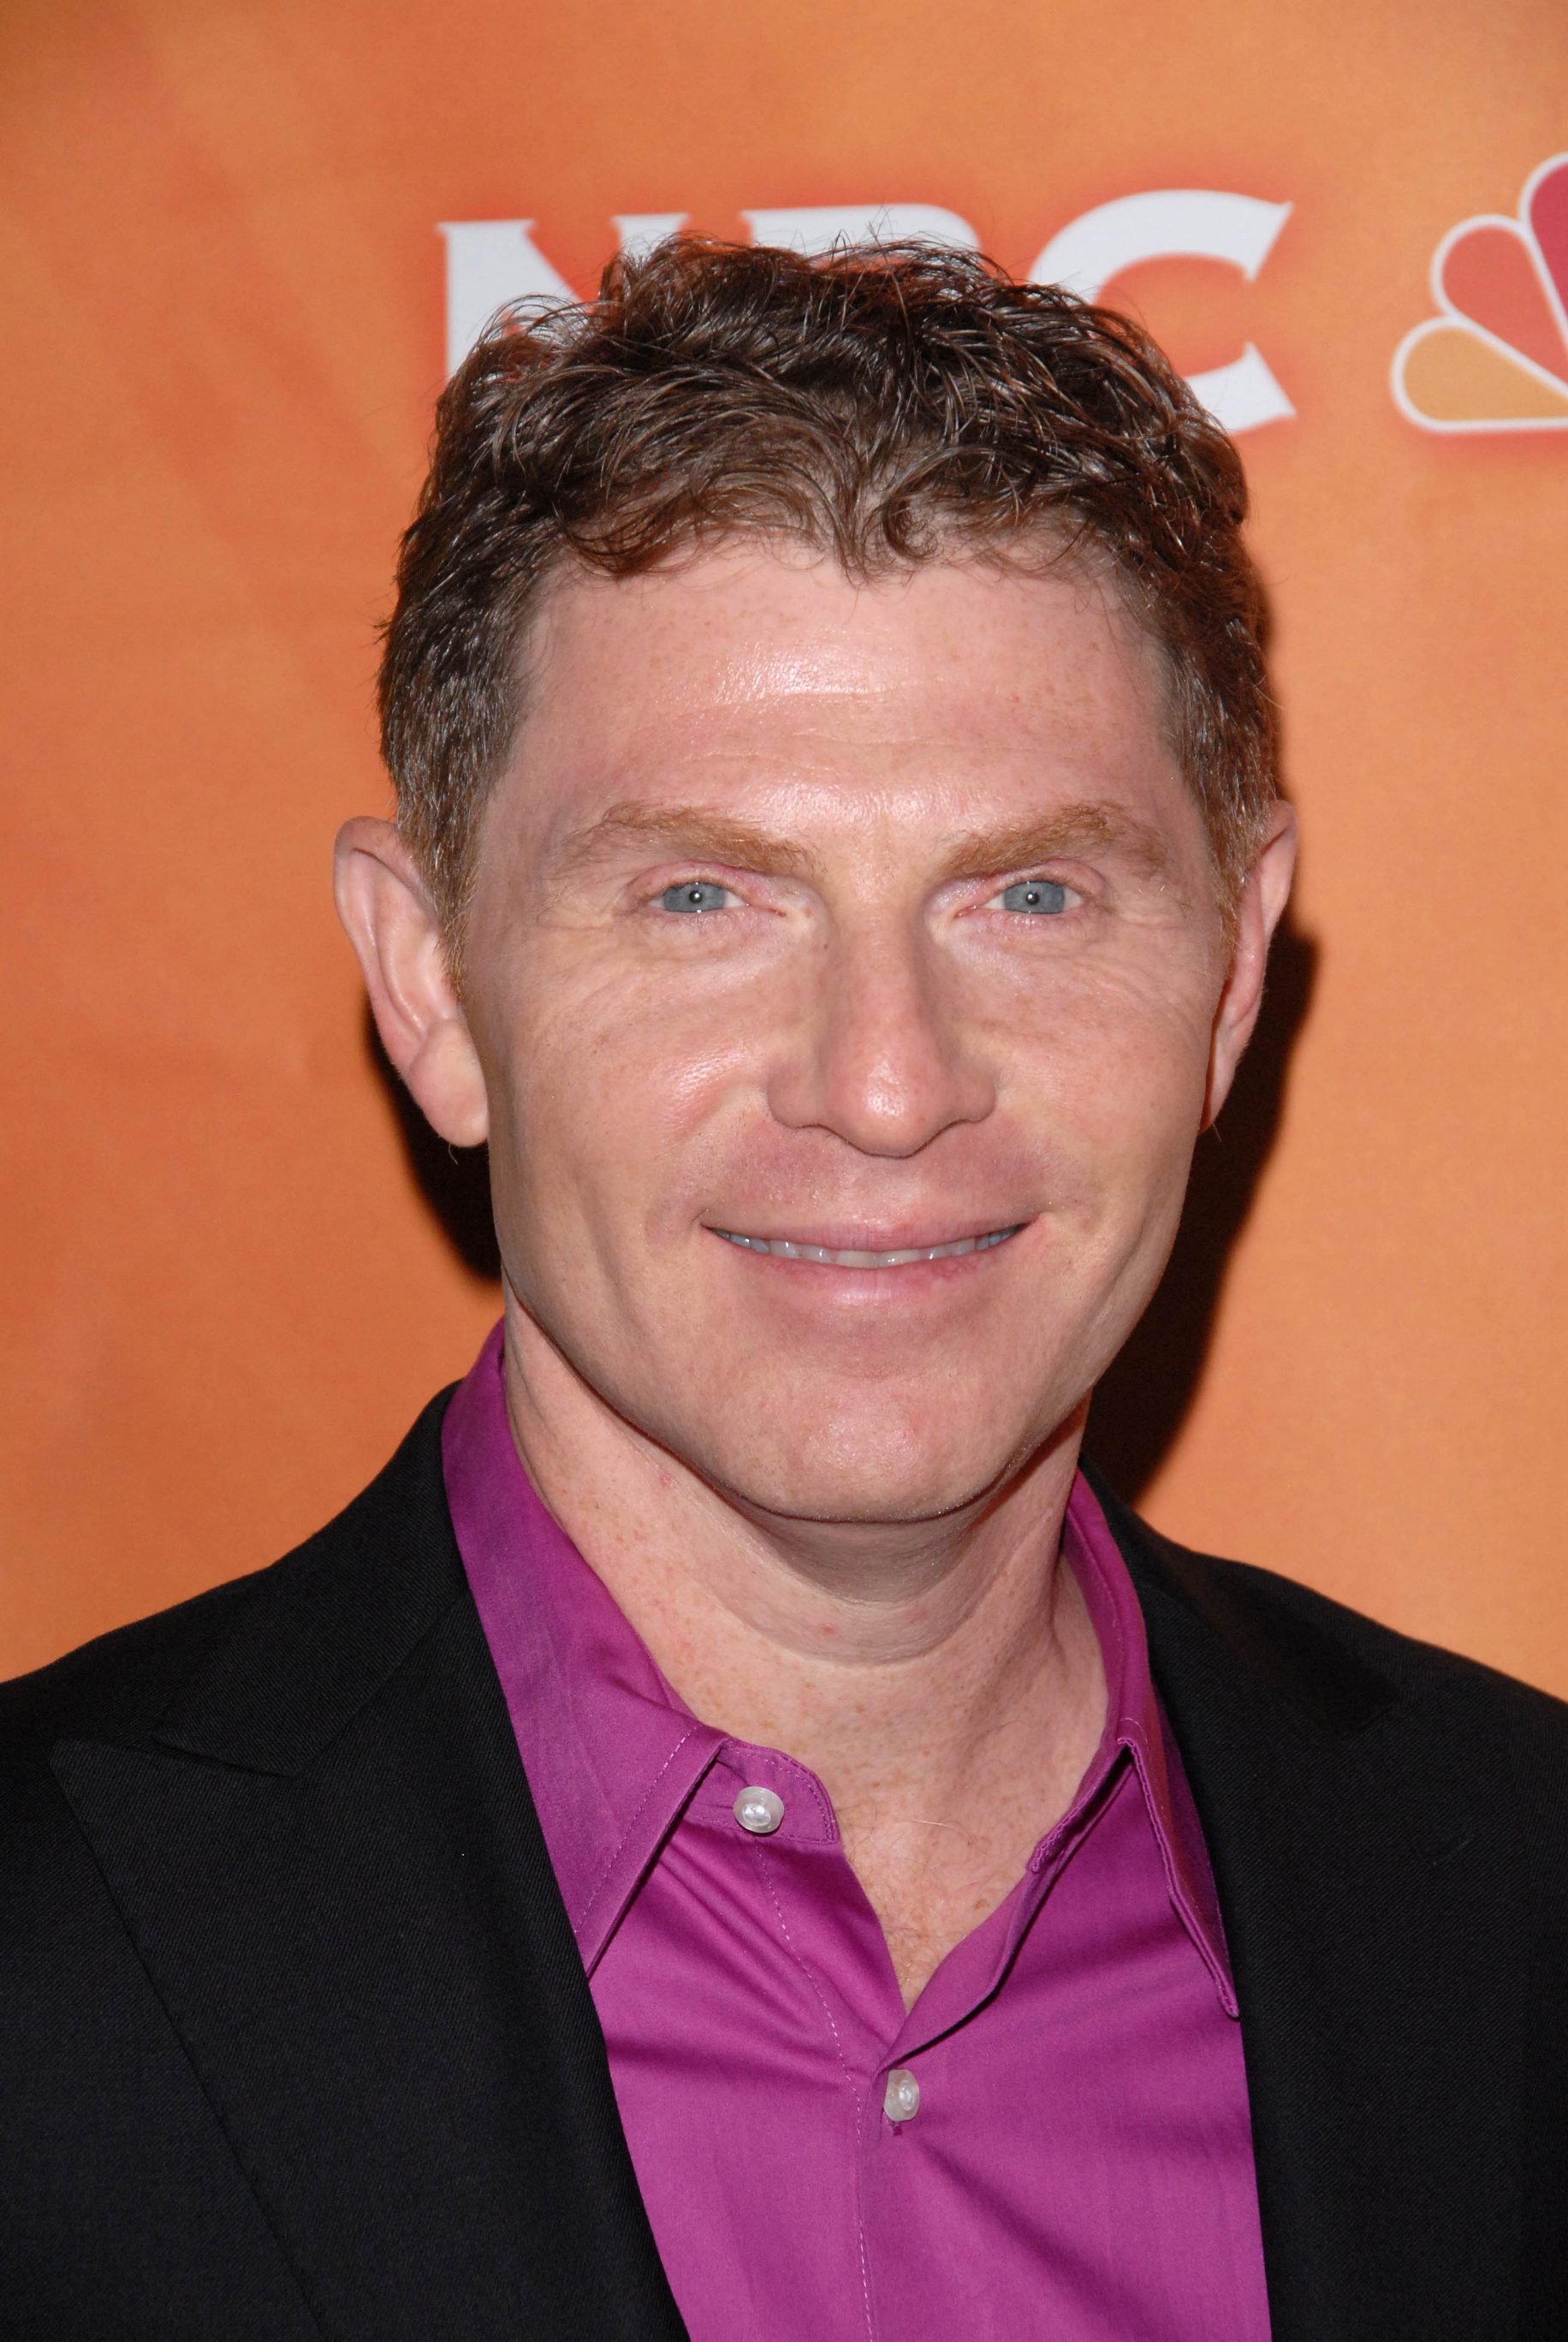 Bobby Flay - American Chef of Top Richest Celebrity Chefs